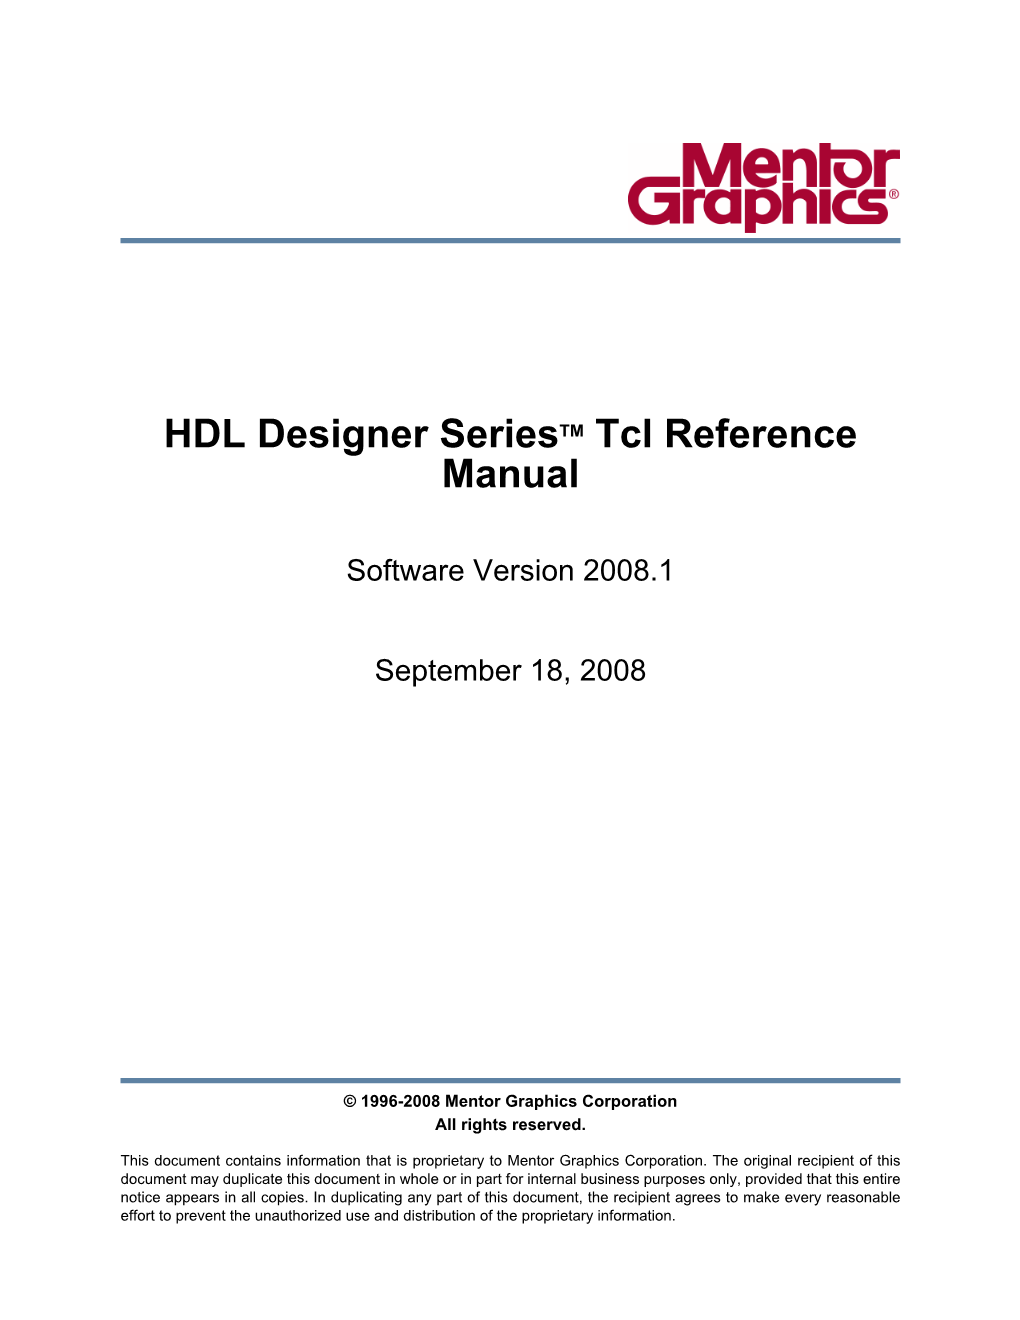 HDL Designer Series Tcl Reference Manual, V2008.1 3 September 18, 2008 Table of Contents